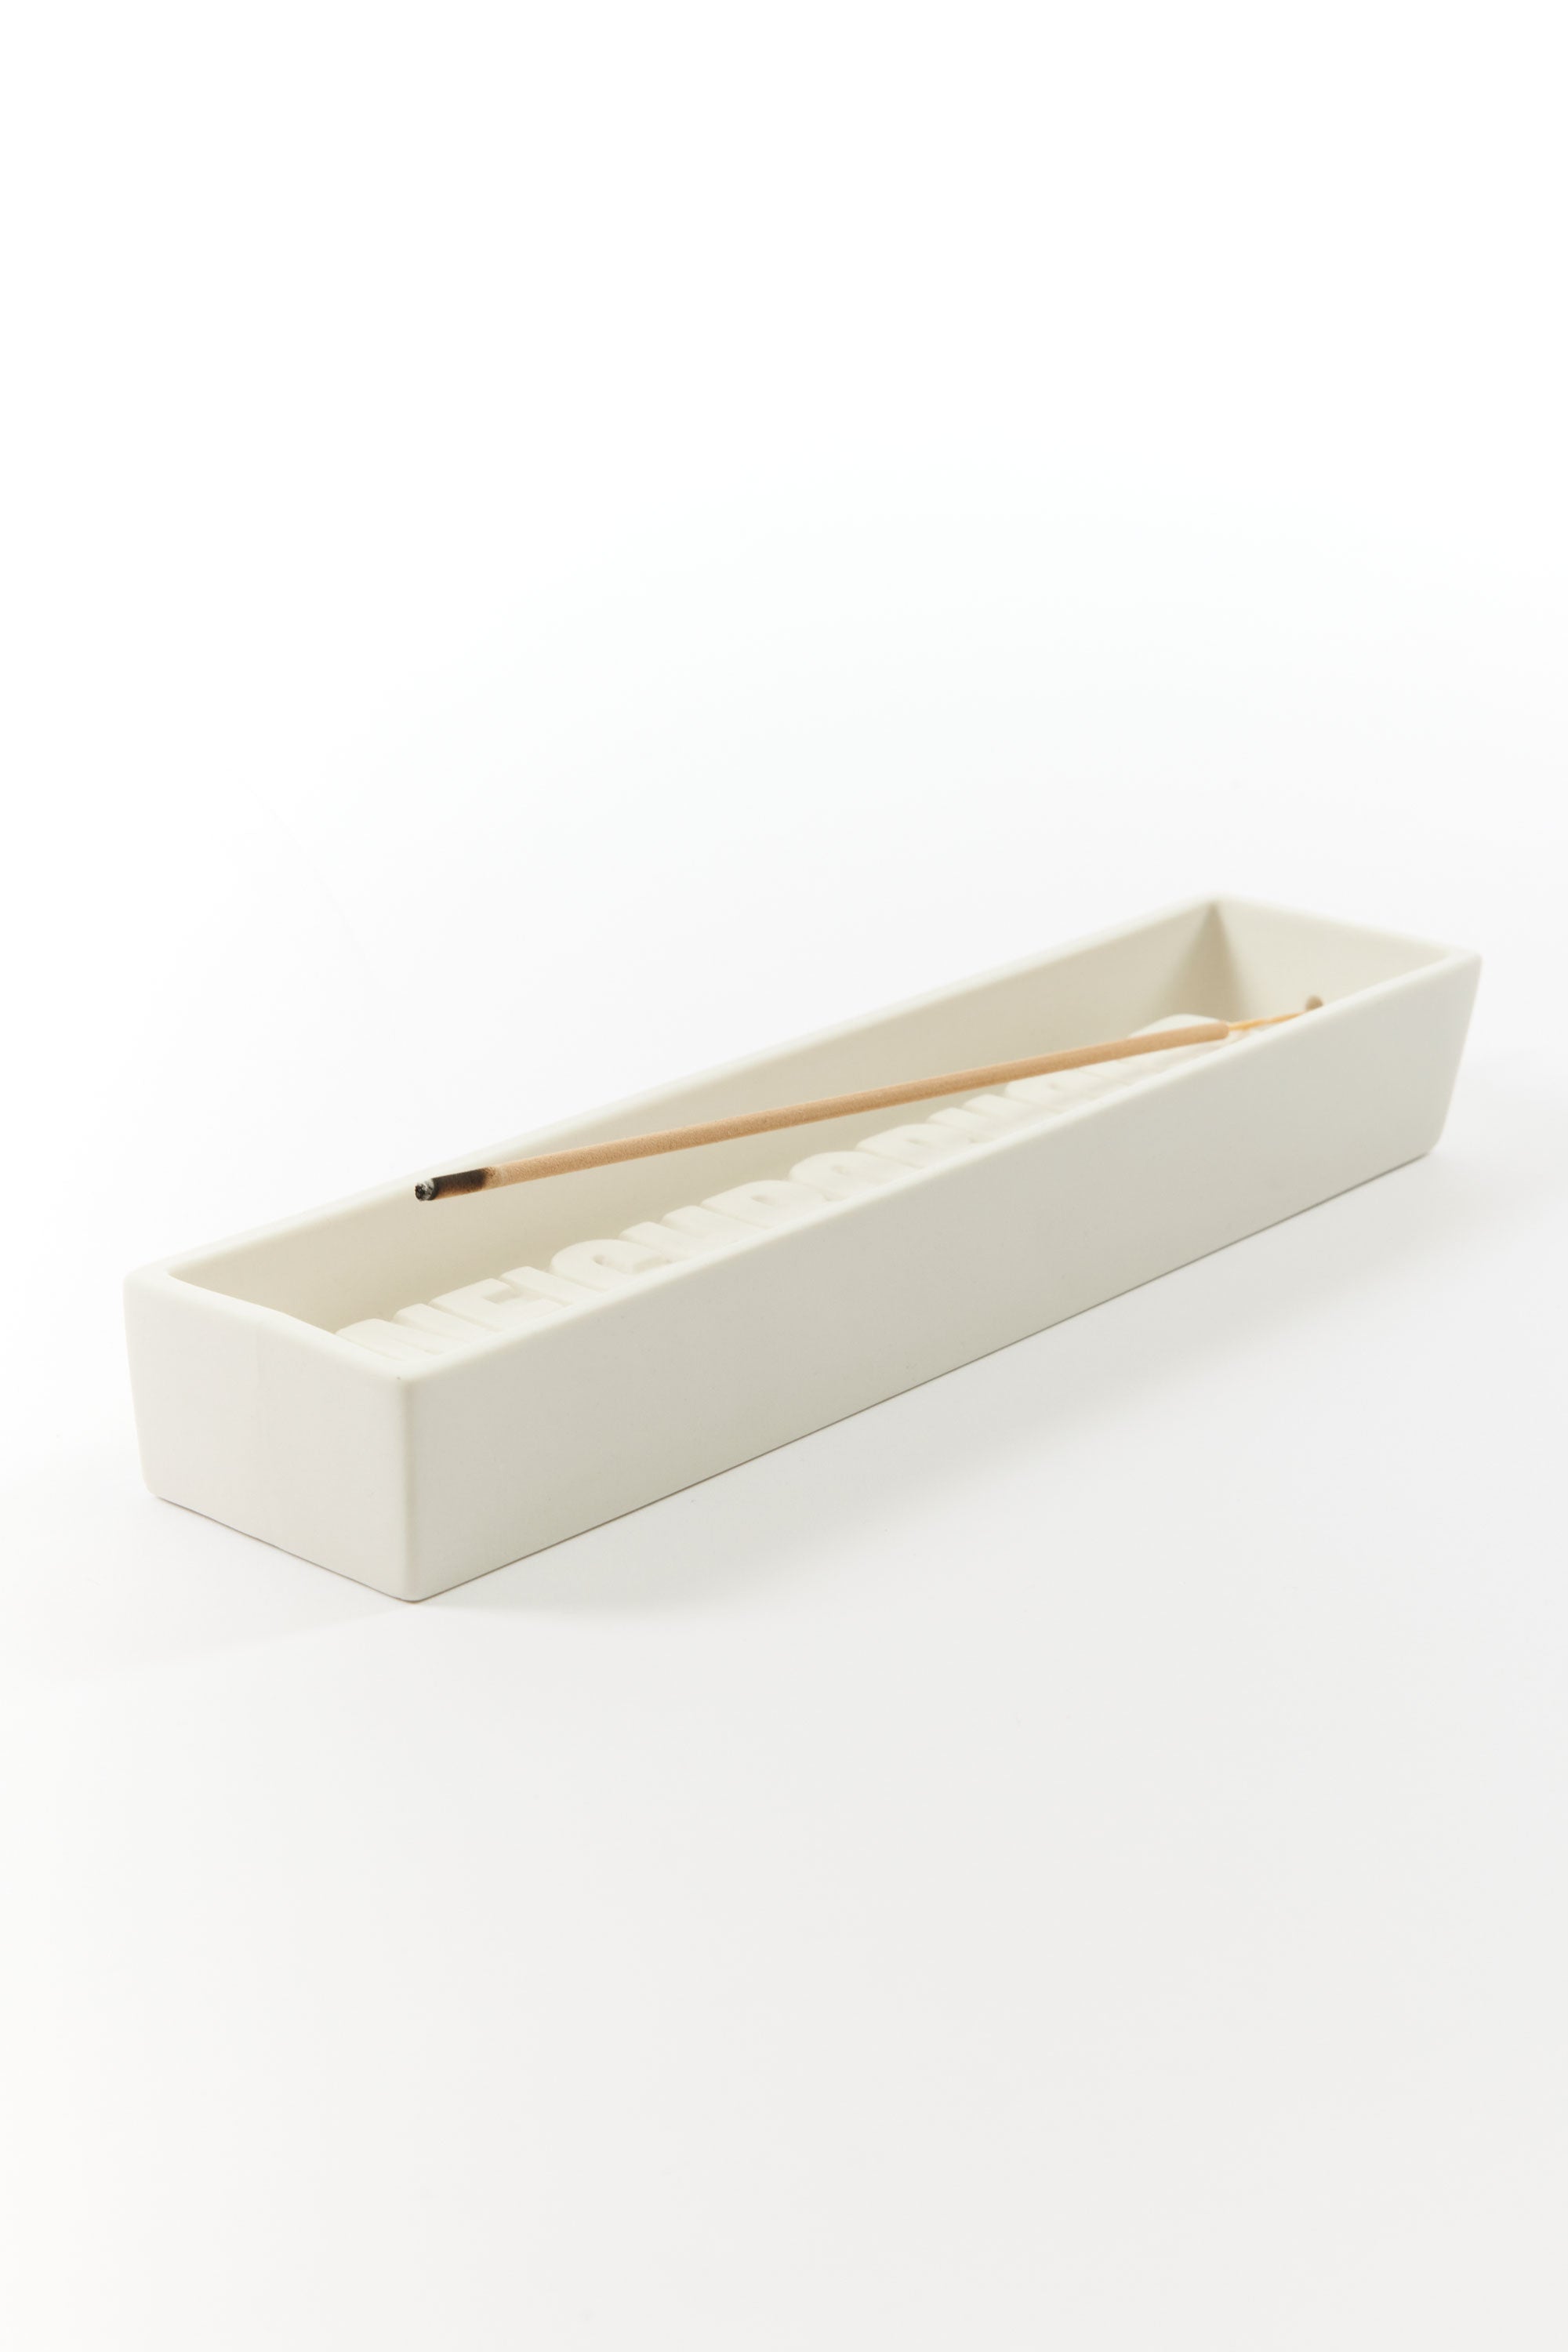 The NEIGHBORHOOD - NEIGHBORHOOD CERAMIC INCENSE TRAY  available online with global shipping, and in PAM Stores Melbourne and Sydney.